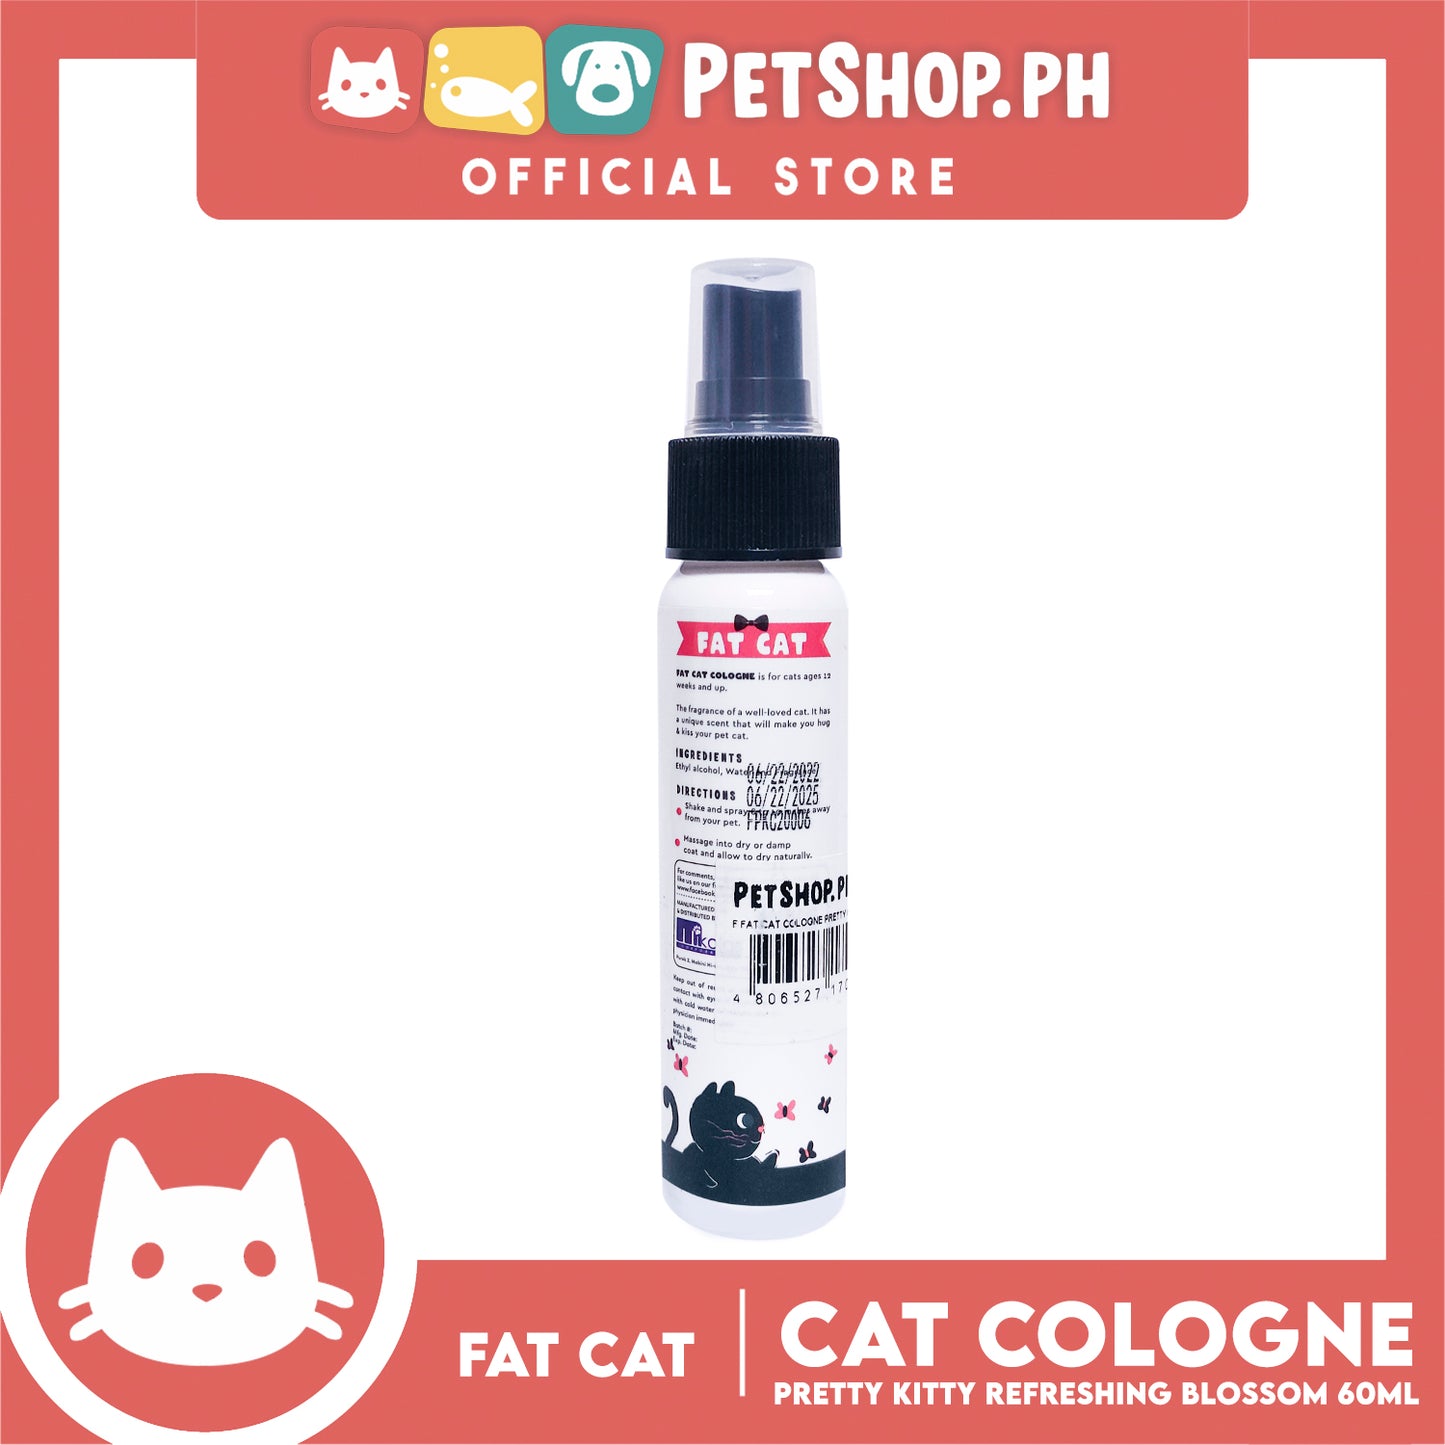 Fat Cat Cologne Pretty Kitty Spray 60ml Refreshing Blossom, Cats Perfume, Cats Cologne